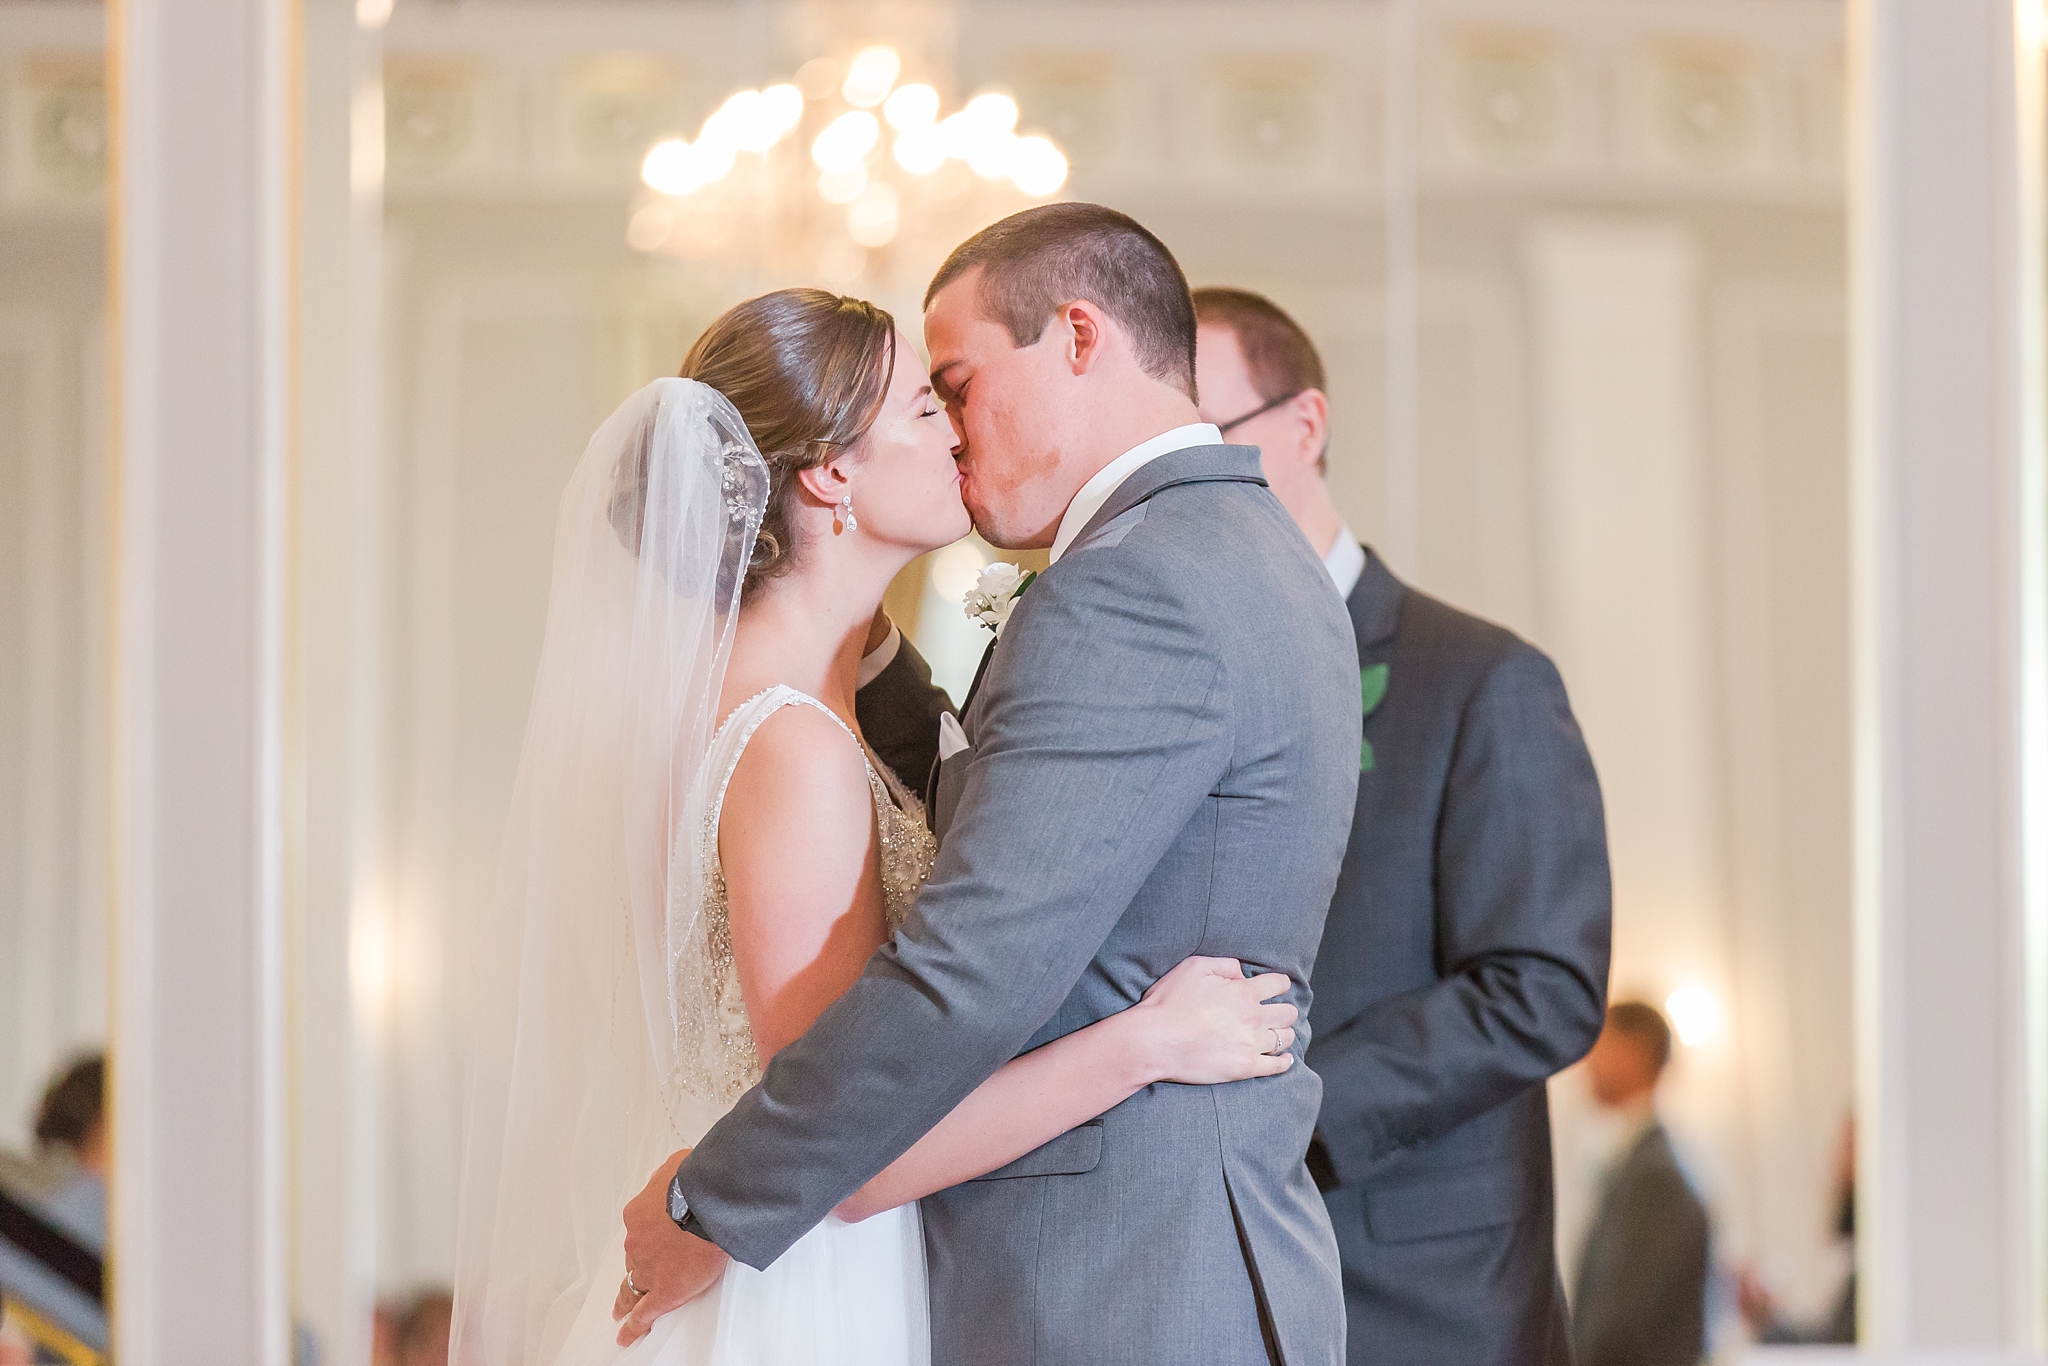 classic-intimate-fun-wedding-photos-at-the-meeting-house-grand-ballroom-in-plymouth-michigan-by-courtney-carolyn-photography_0032.jpg